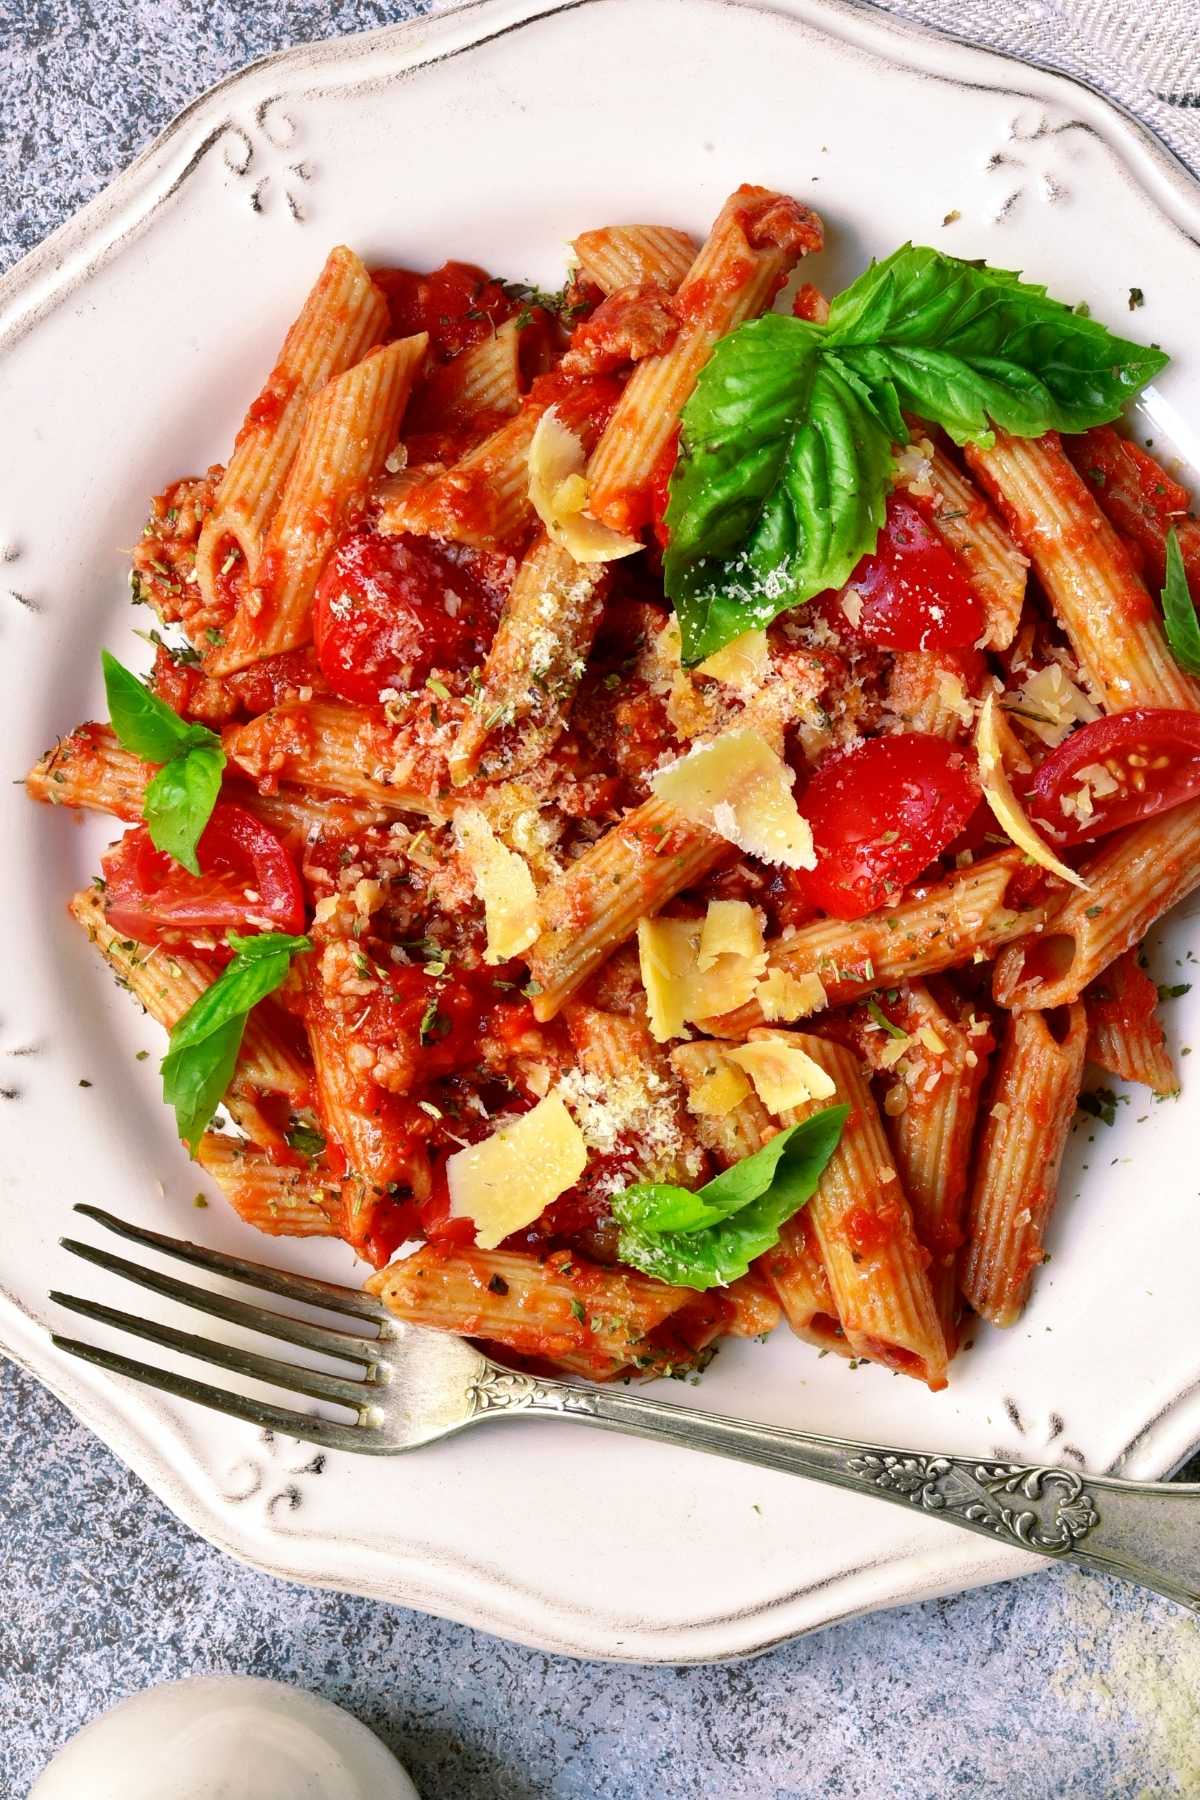 Penne bolognese is a hearty dish that’s surprisingly easy to make. It’s satisfying enough for even the biggest of appetites.